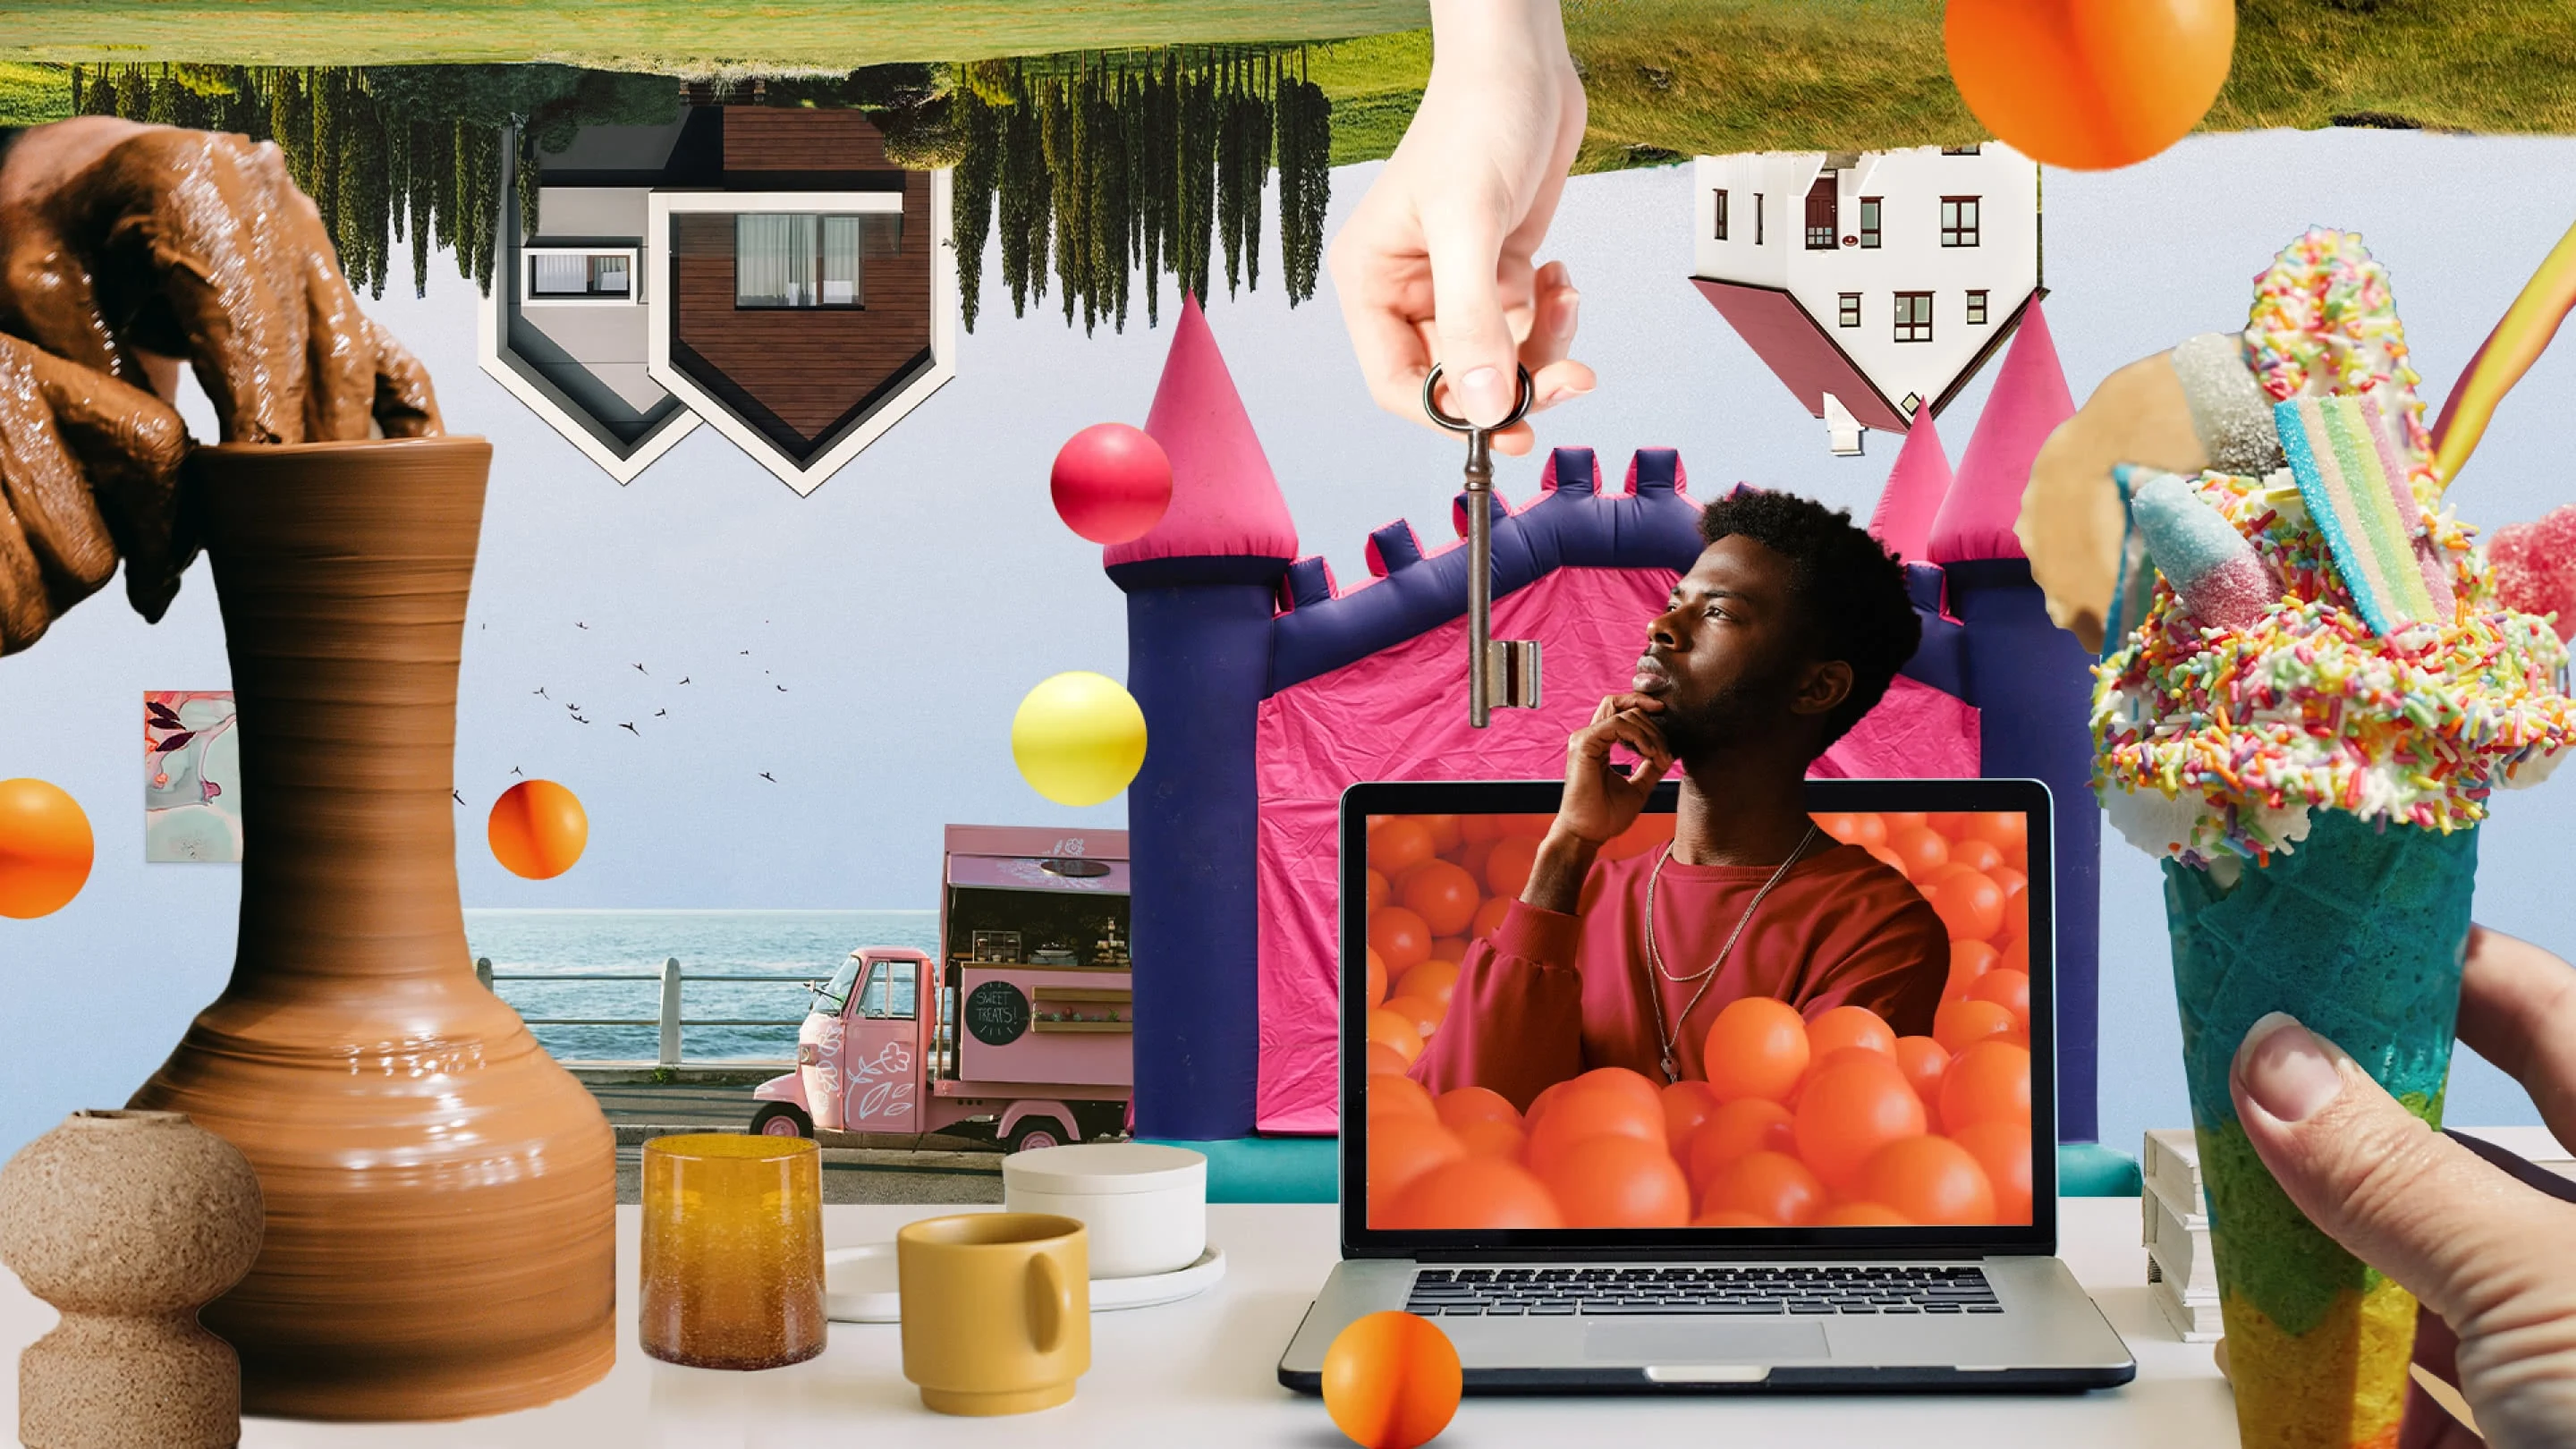 Colourful collage: upside-down countryside at the top. A pair of hands are moulding a pottery vase on the left. A blue cone with colourful ice cream and sprinkles is on the right. A Black man in a red shirt ponders, as a key is handed down to him from above.